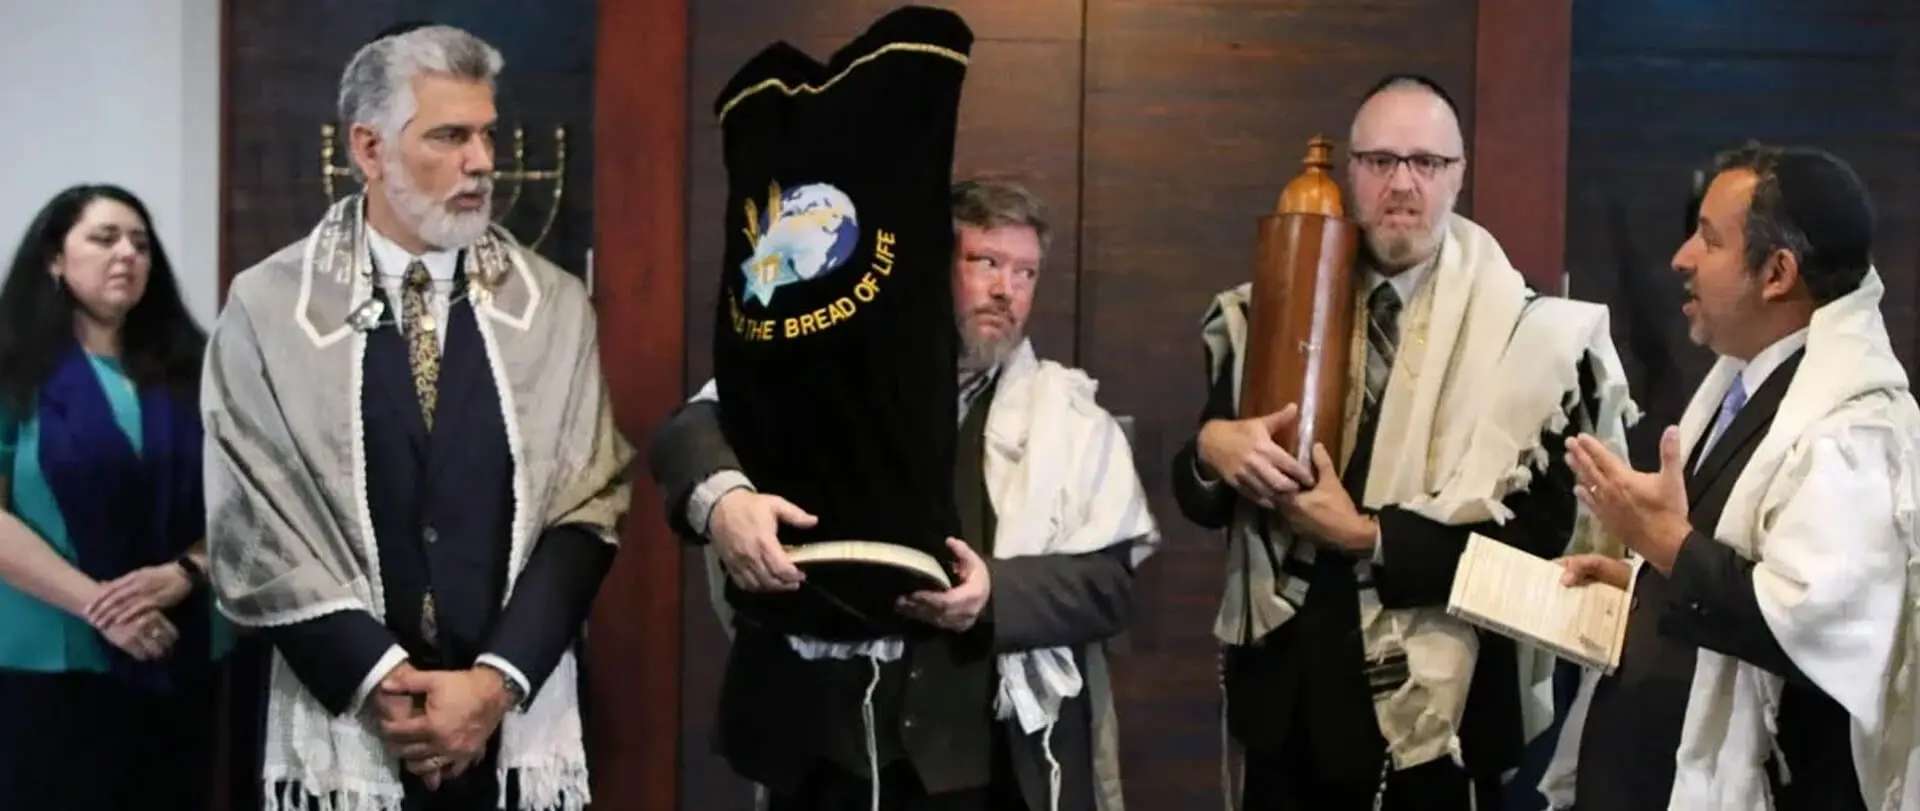 A group of people dressed in costumes and holding torah scrolls.